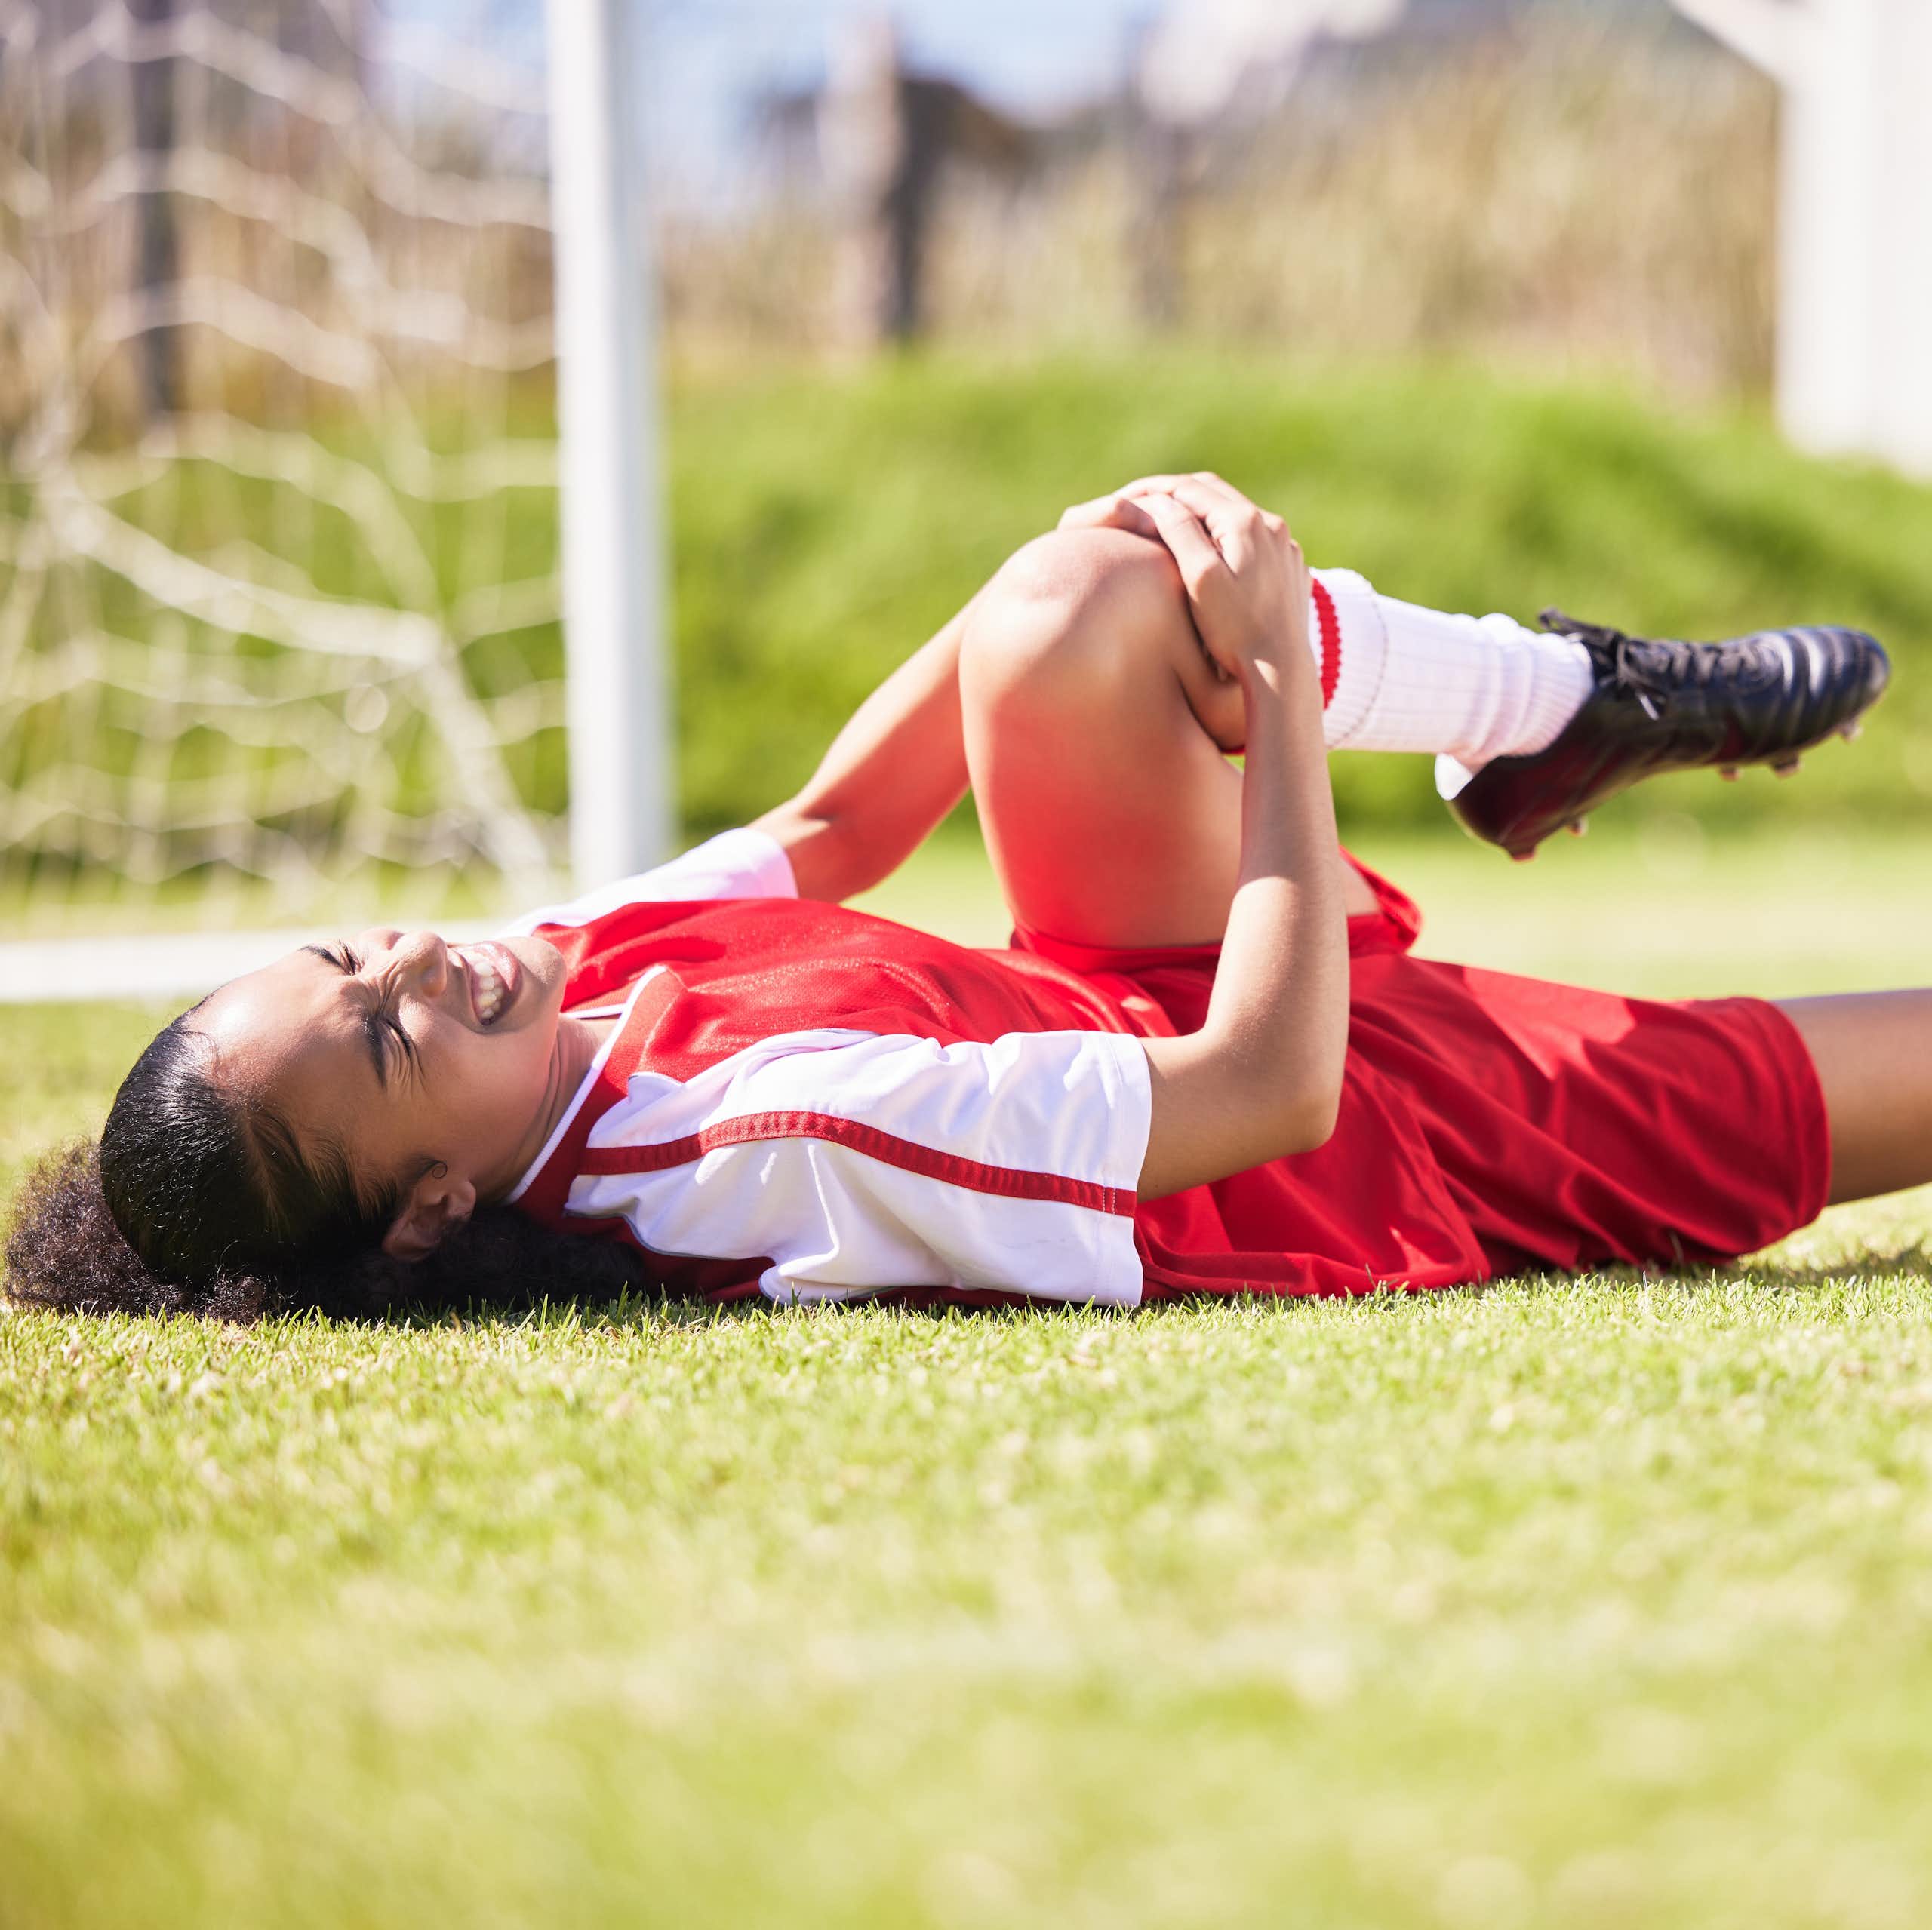 A young woman lying on a soccer pitch clutching her knee in pain.